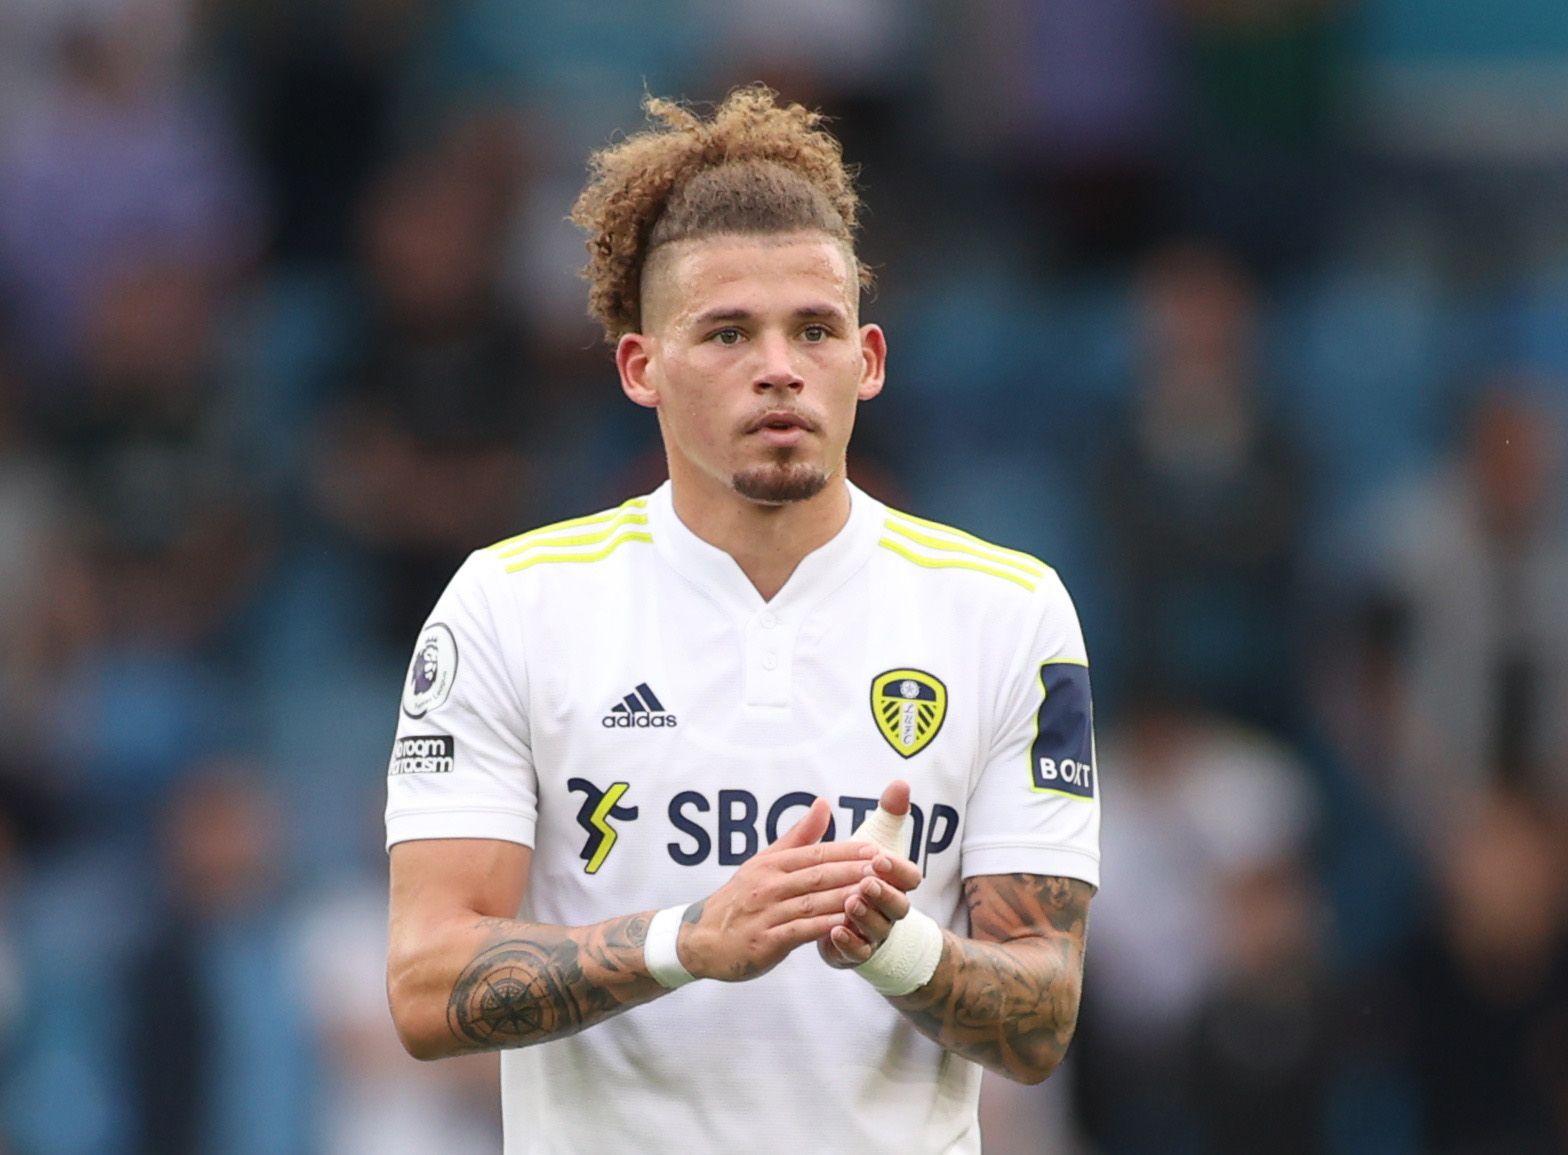 Soccer Football - Premier League - Leeds United v West Ham United - Elland Road, Leeds, Britain - September 25, 2021  Leeds United's Kalvin Phillips applauds the fans after the match Action Images via Reuters/Lee Smith EDITORIAL USE ONLY. No use with unauthorized audio, video, data, fixture lists, club/league logos or 'live' services. Online in-match use limited to 75 images, no video emulation. No use in betting, games or single club /league/player publications.  Please contact your account rep